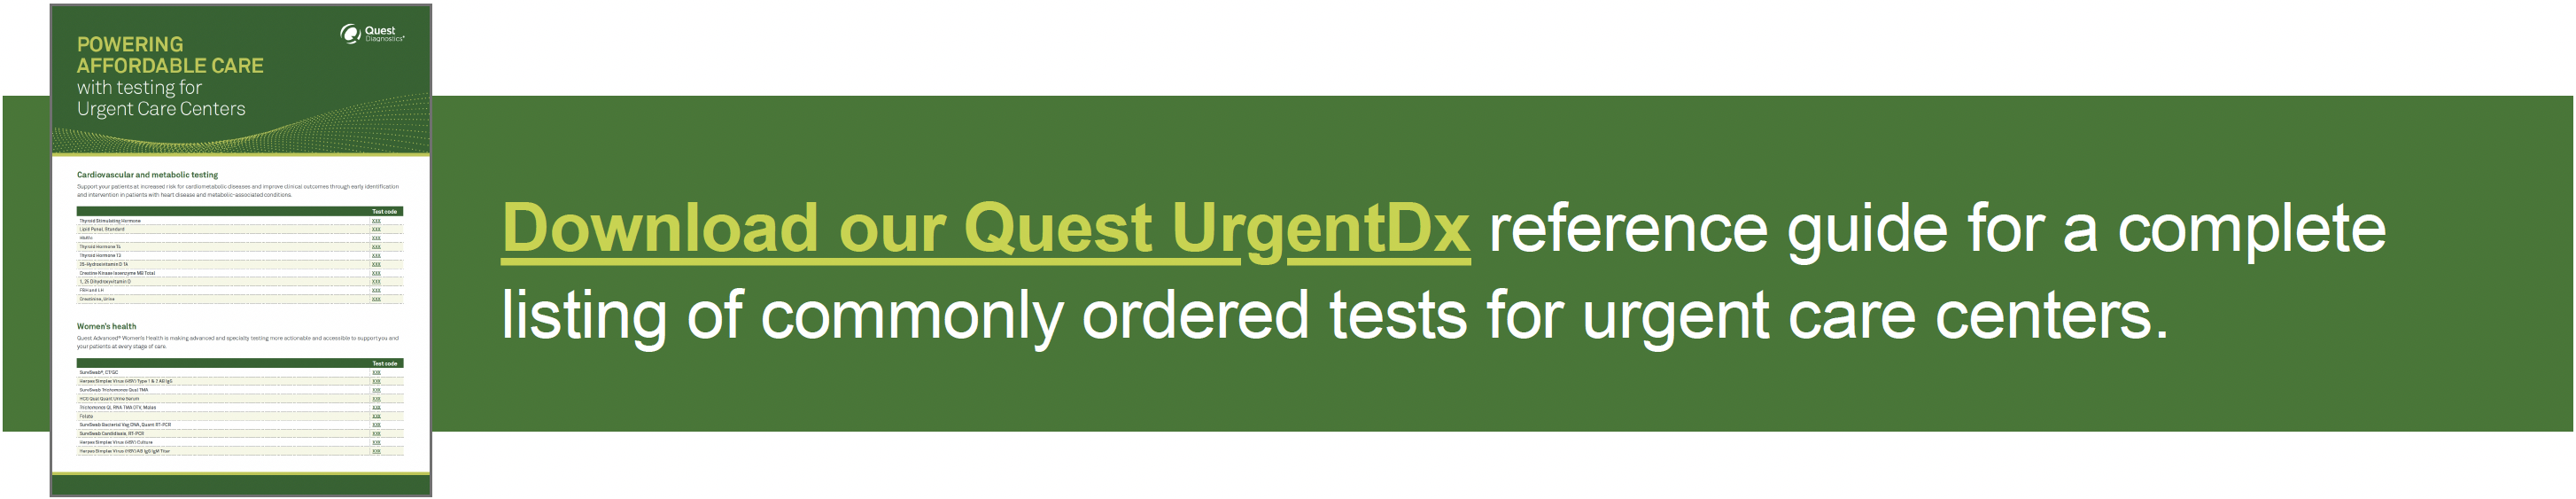 Download our Quest UrgentDx reference guide for a complete listing of commonly ordered tests for urgent care centers.